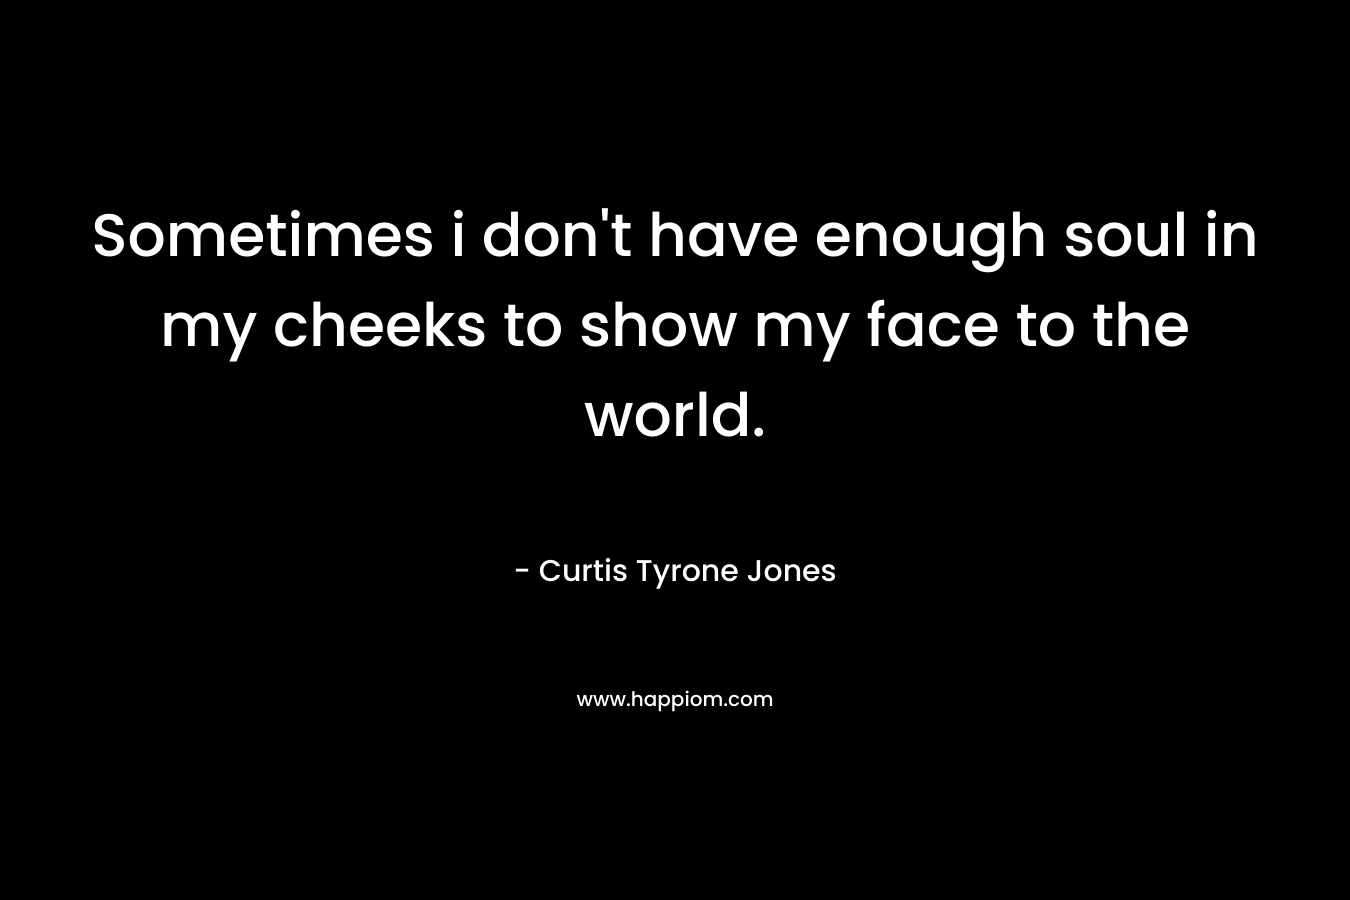 Sometimes i don’t have enough soul in my cheeks to show my face to the world. – Curtis Tyrone Jones